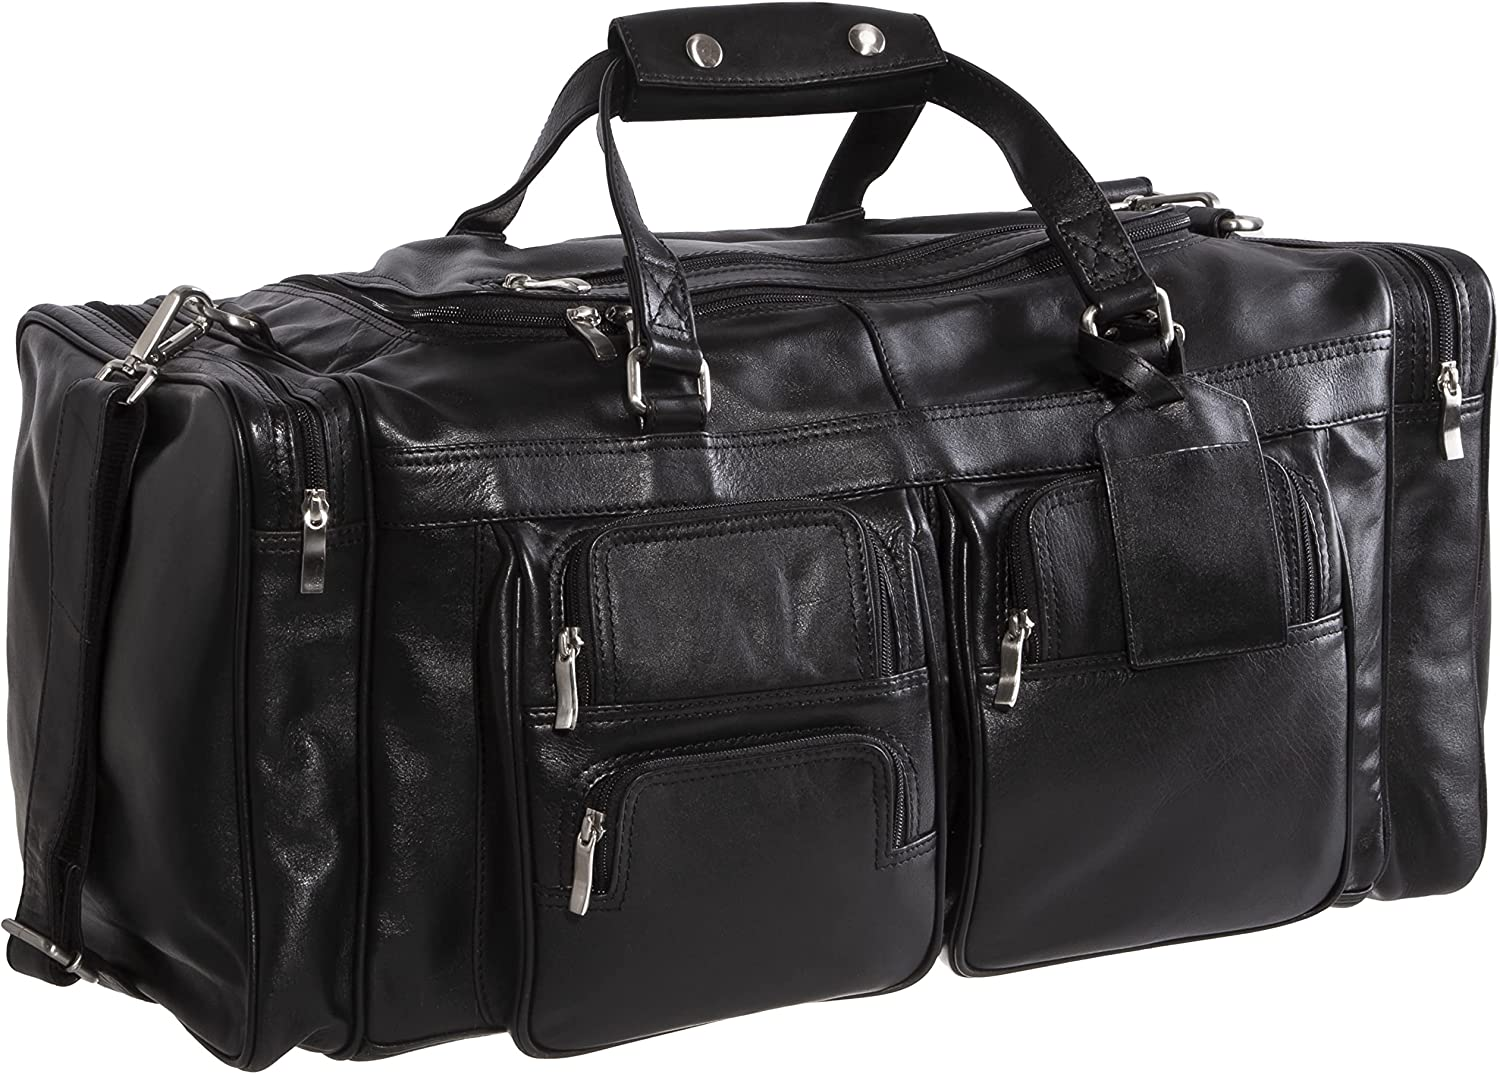 Asge Travel Duffel Bag for Men Leather Overnight Weekender Luggage